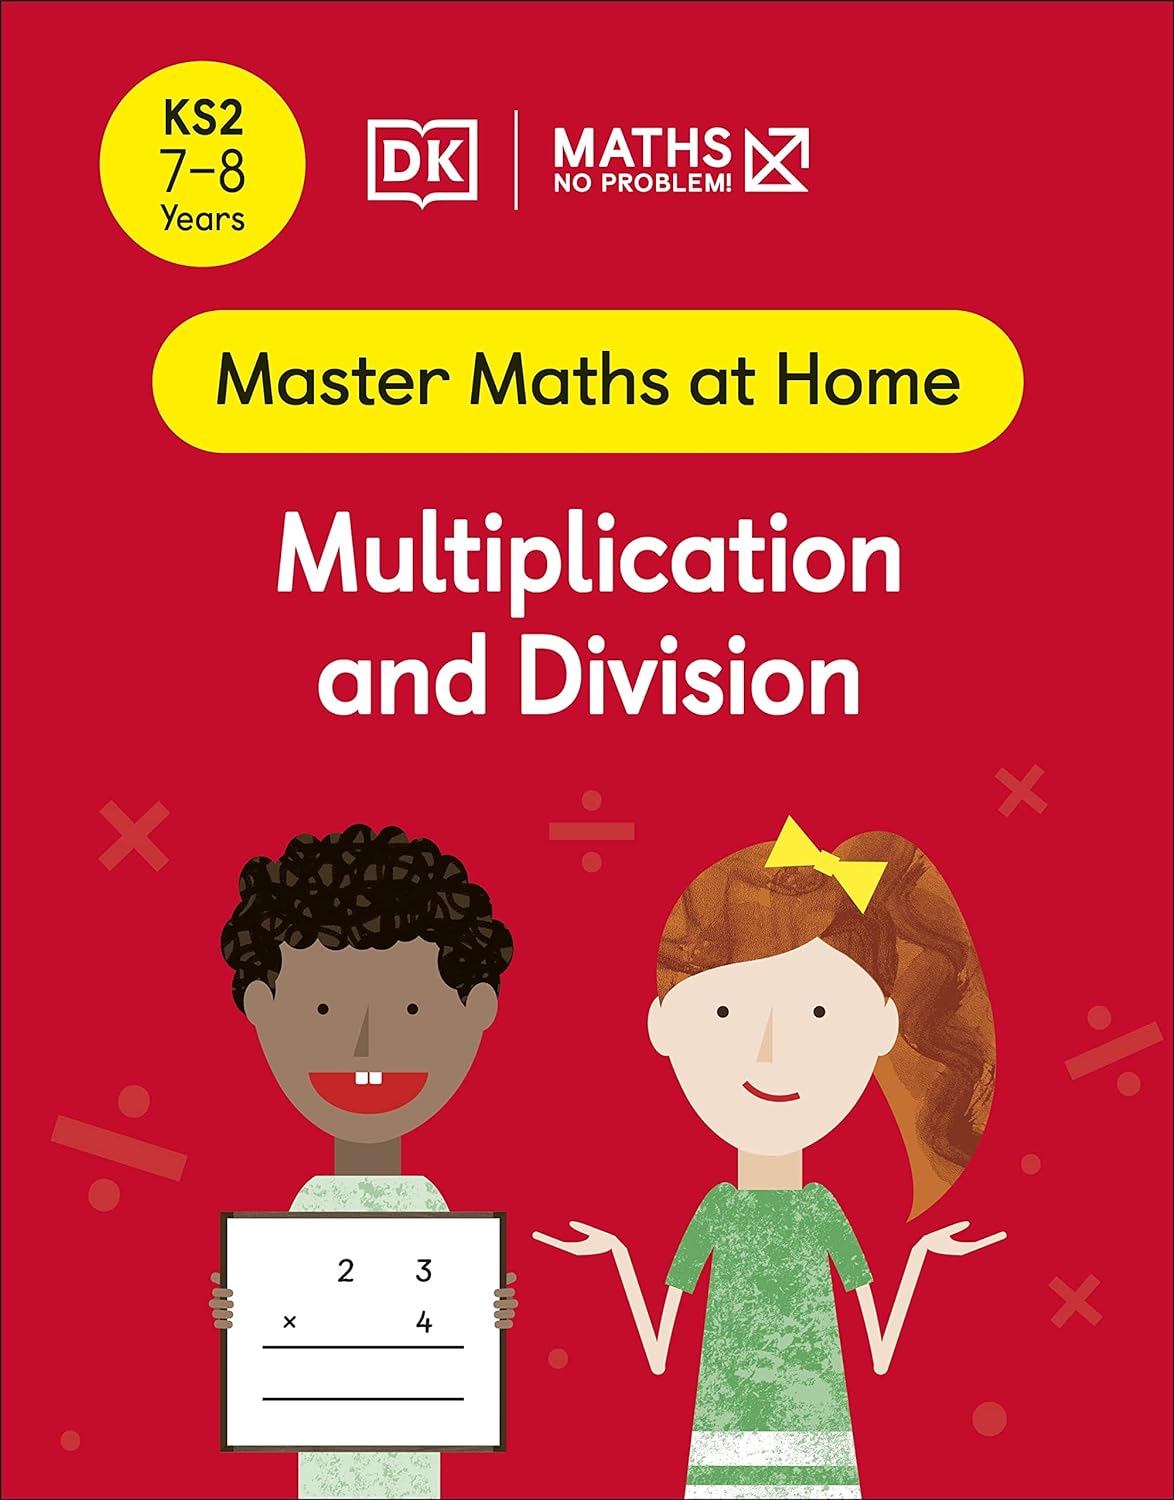 Maths ― No Problem! Multiplication And Division, Ages 7-8 (Key Stage 2)